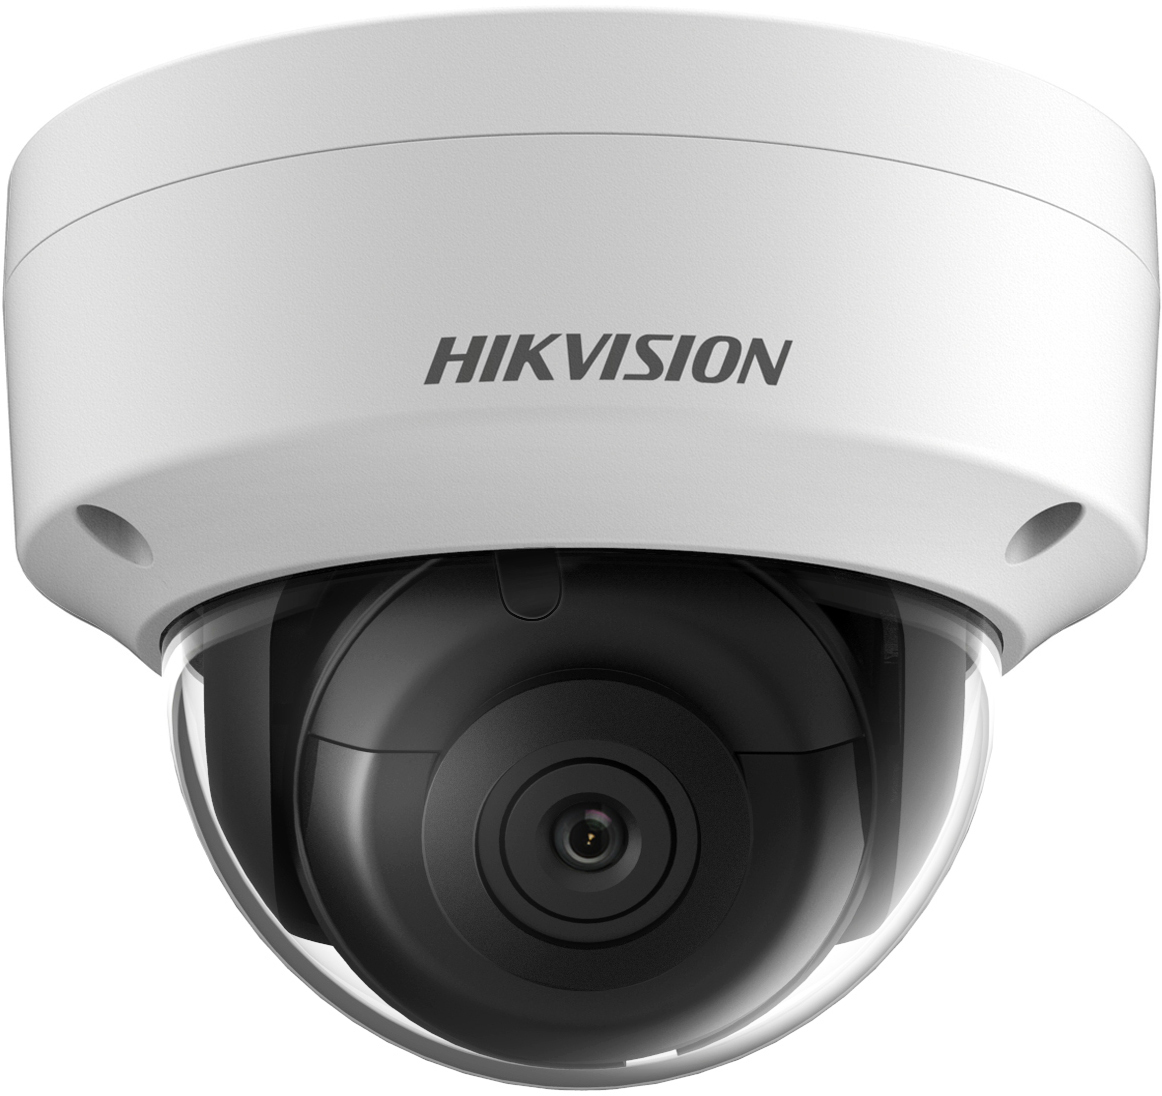 hikvision 2mp ip dome camera with audio